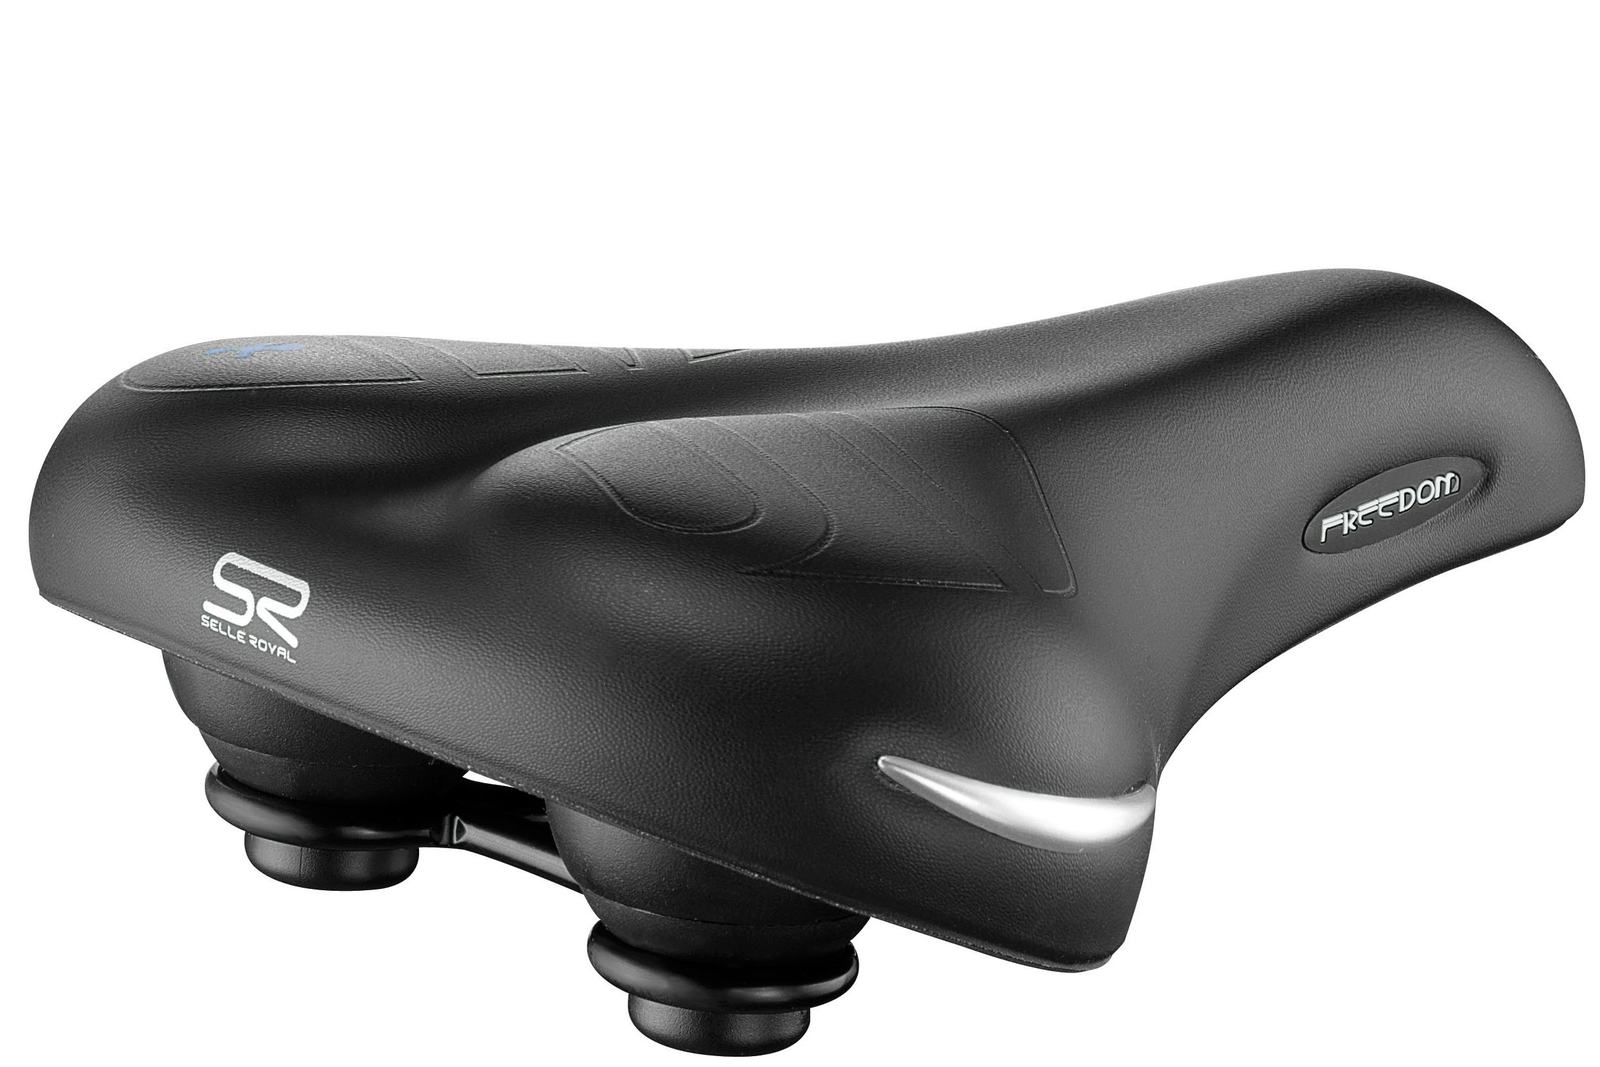 Strengtex is Selle Royal’s newly developed saddle cover – Photo Selle Royal